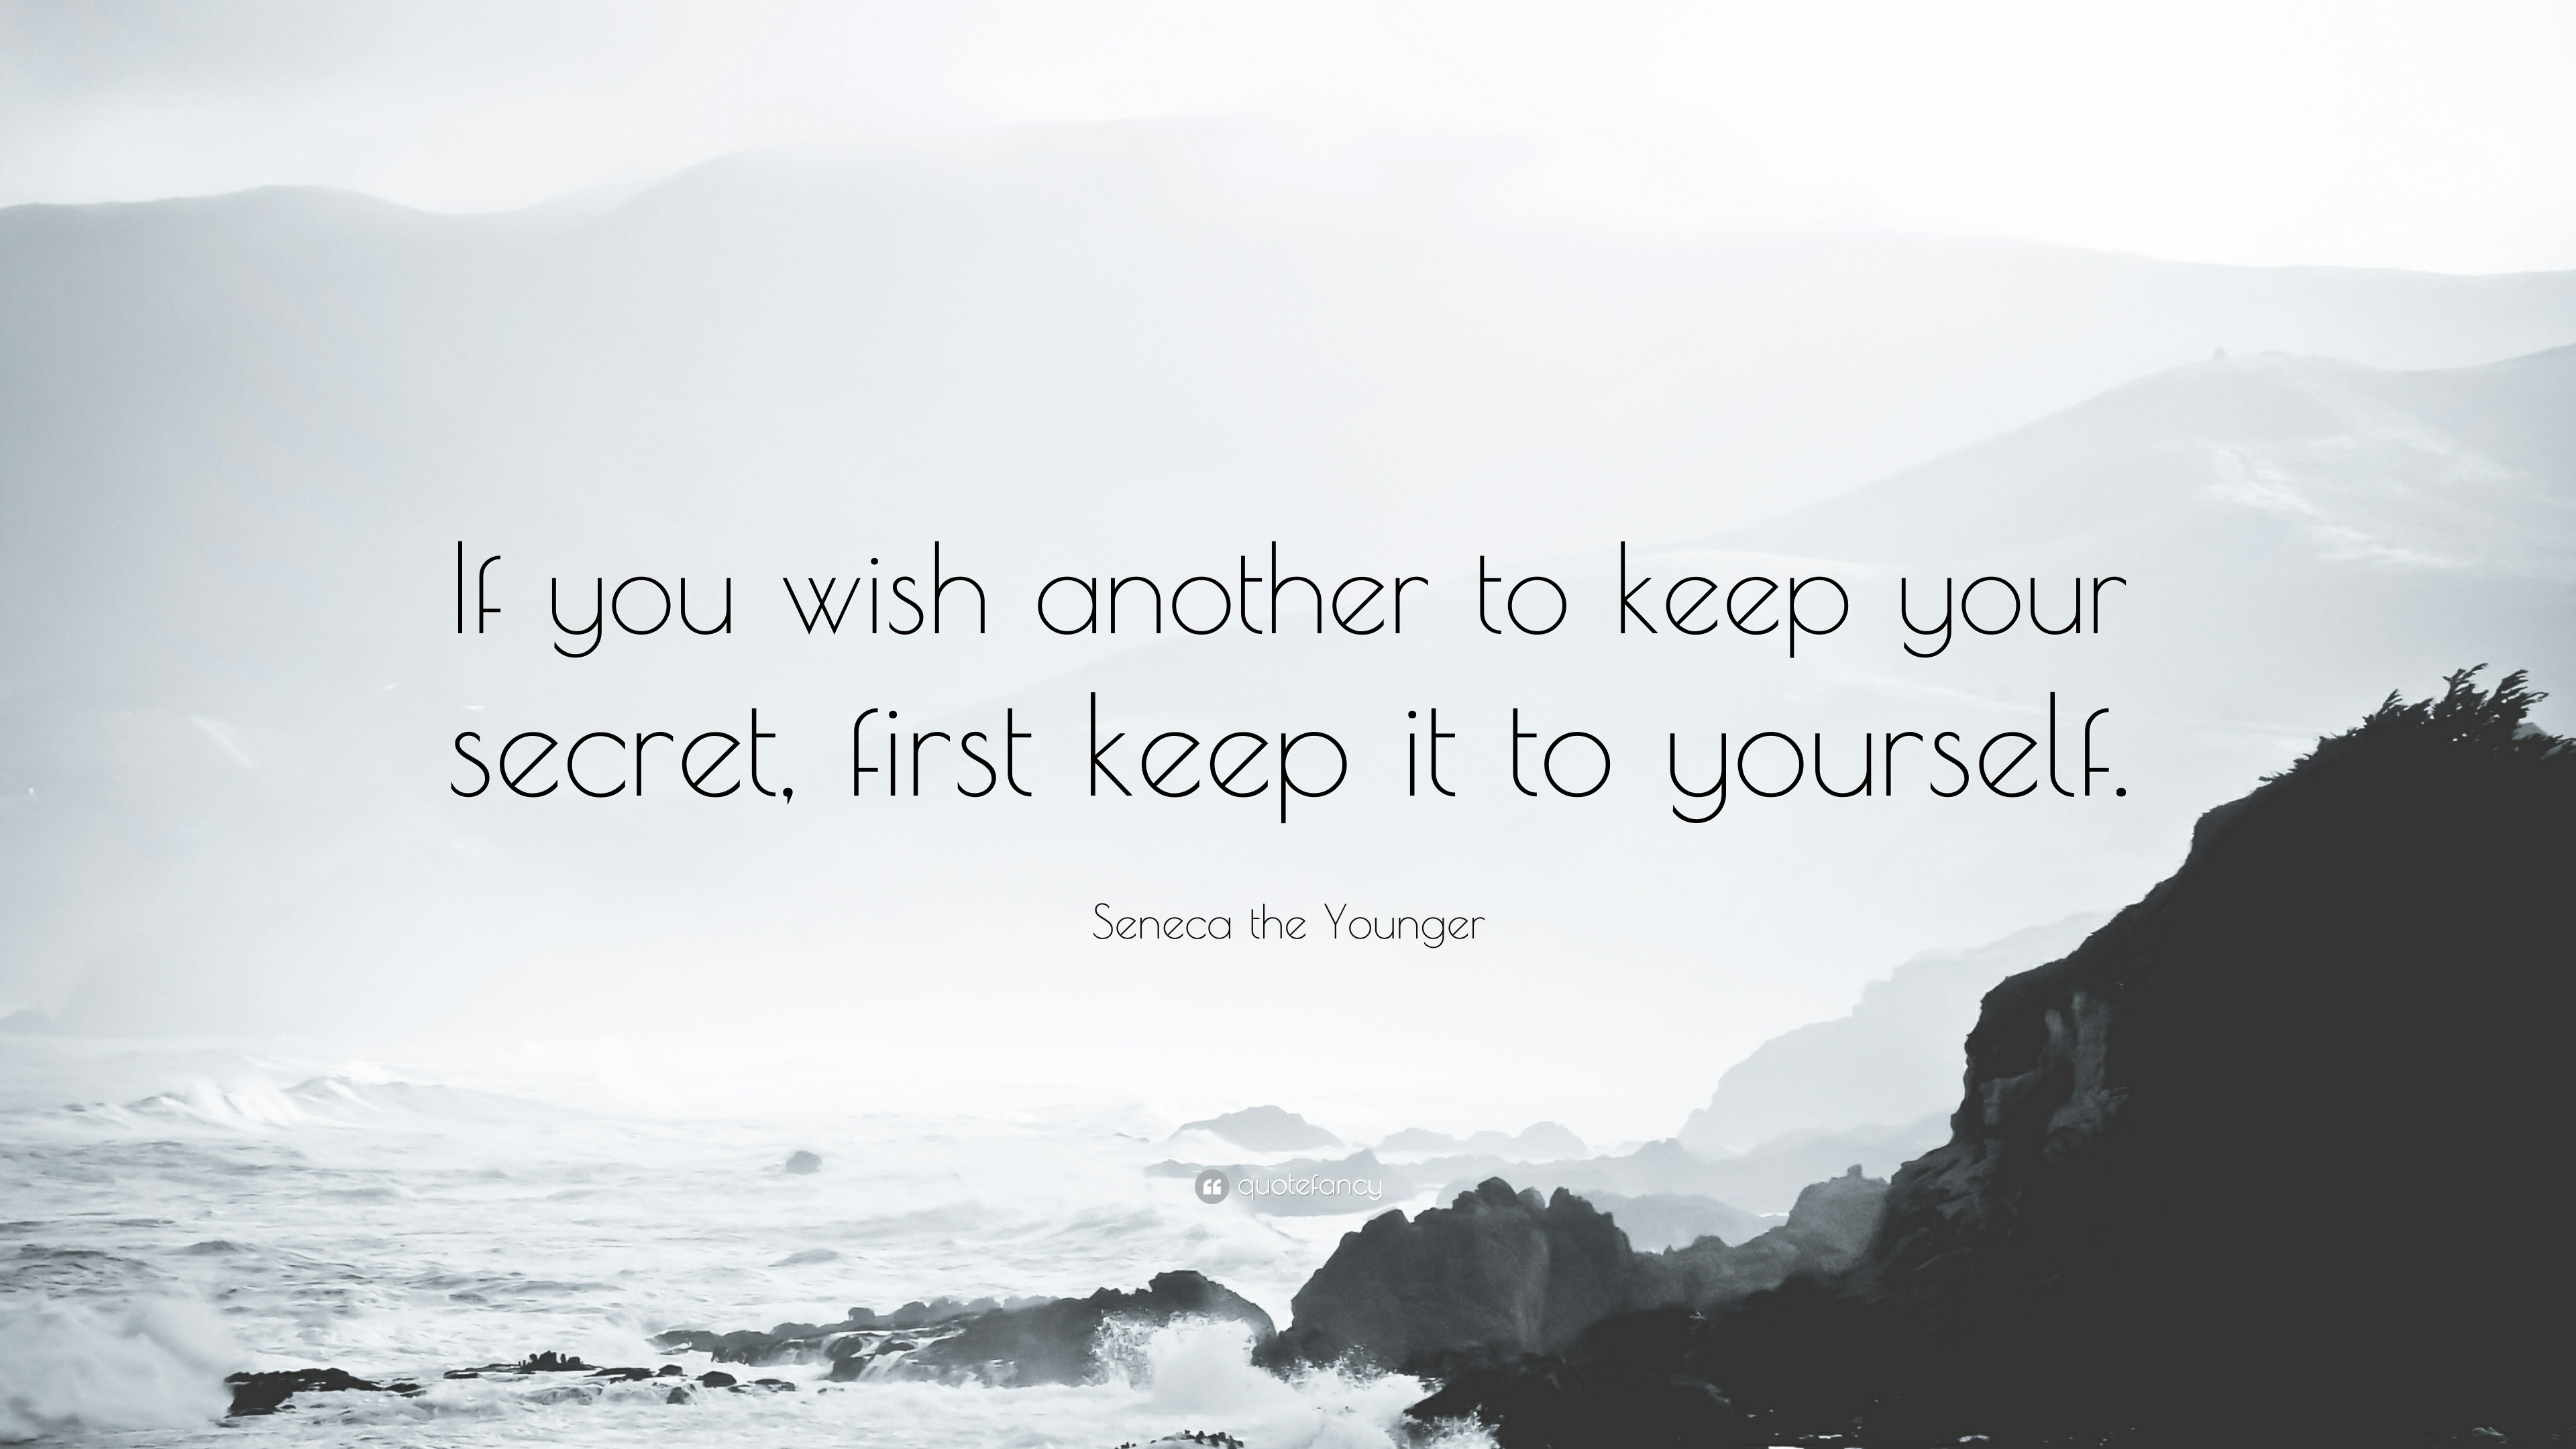 Seneca the Younger Quote: “If you wish another to keep your secret ...